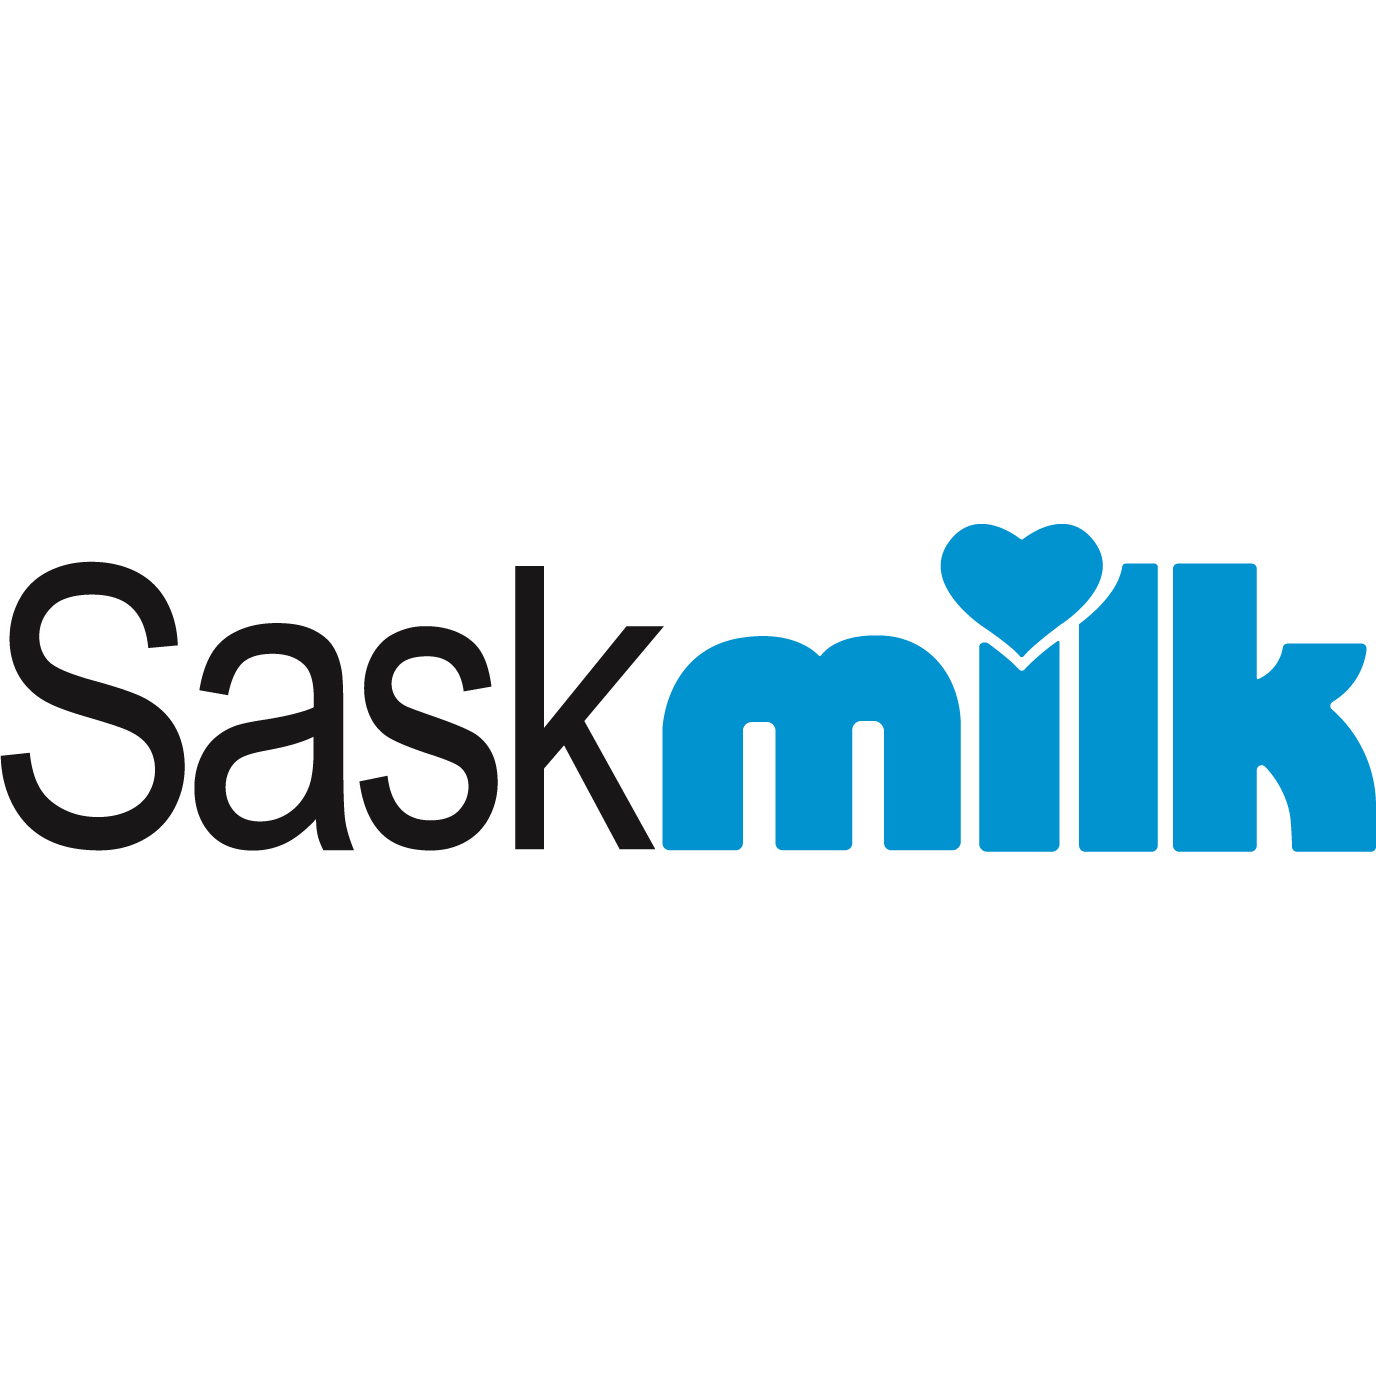 Direct West dials into the power of Hivestack’s geotemporal Ad Server technology to drive brand awareness and purchase intent for SaskMilk Armstrong Cheese.